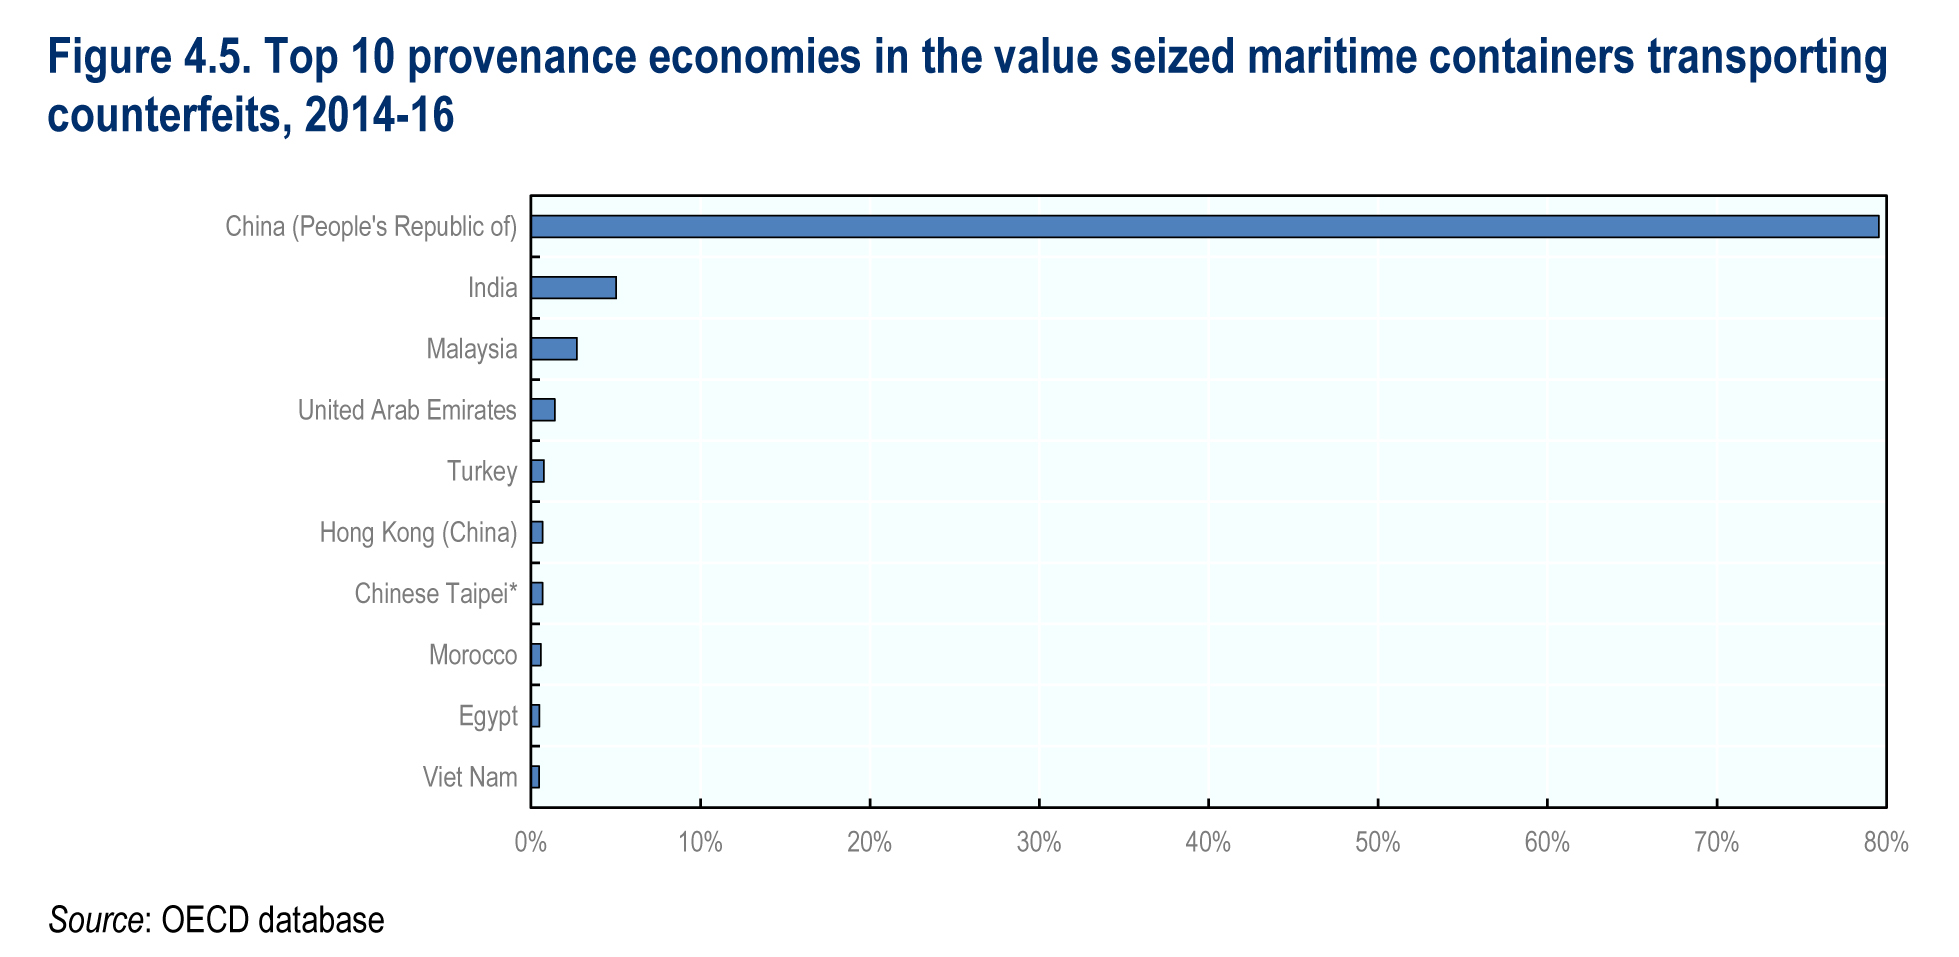 Top 10 provenance economies in the value seized maritime containers transporting counterfeits, 2014-16